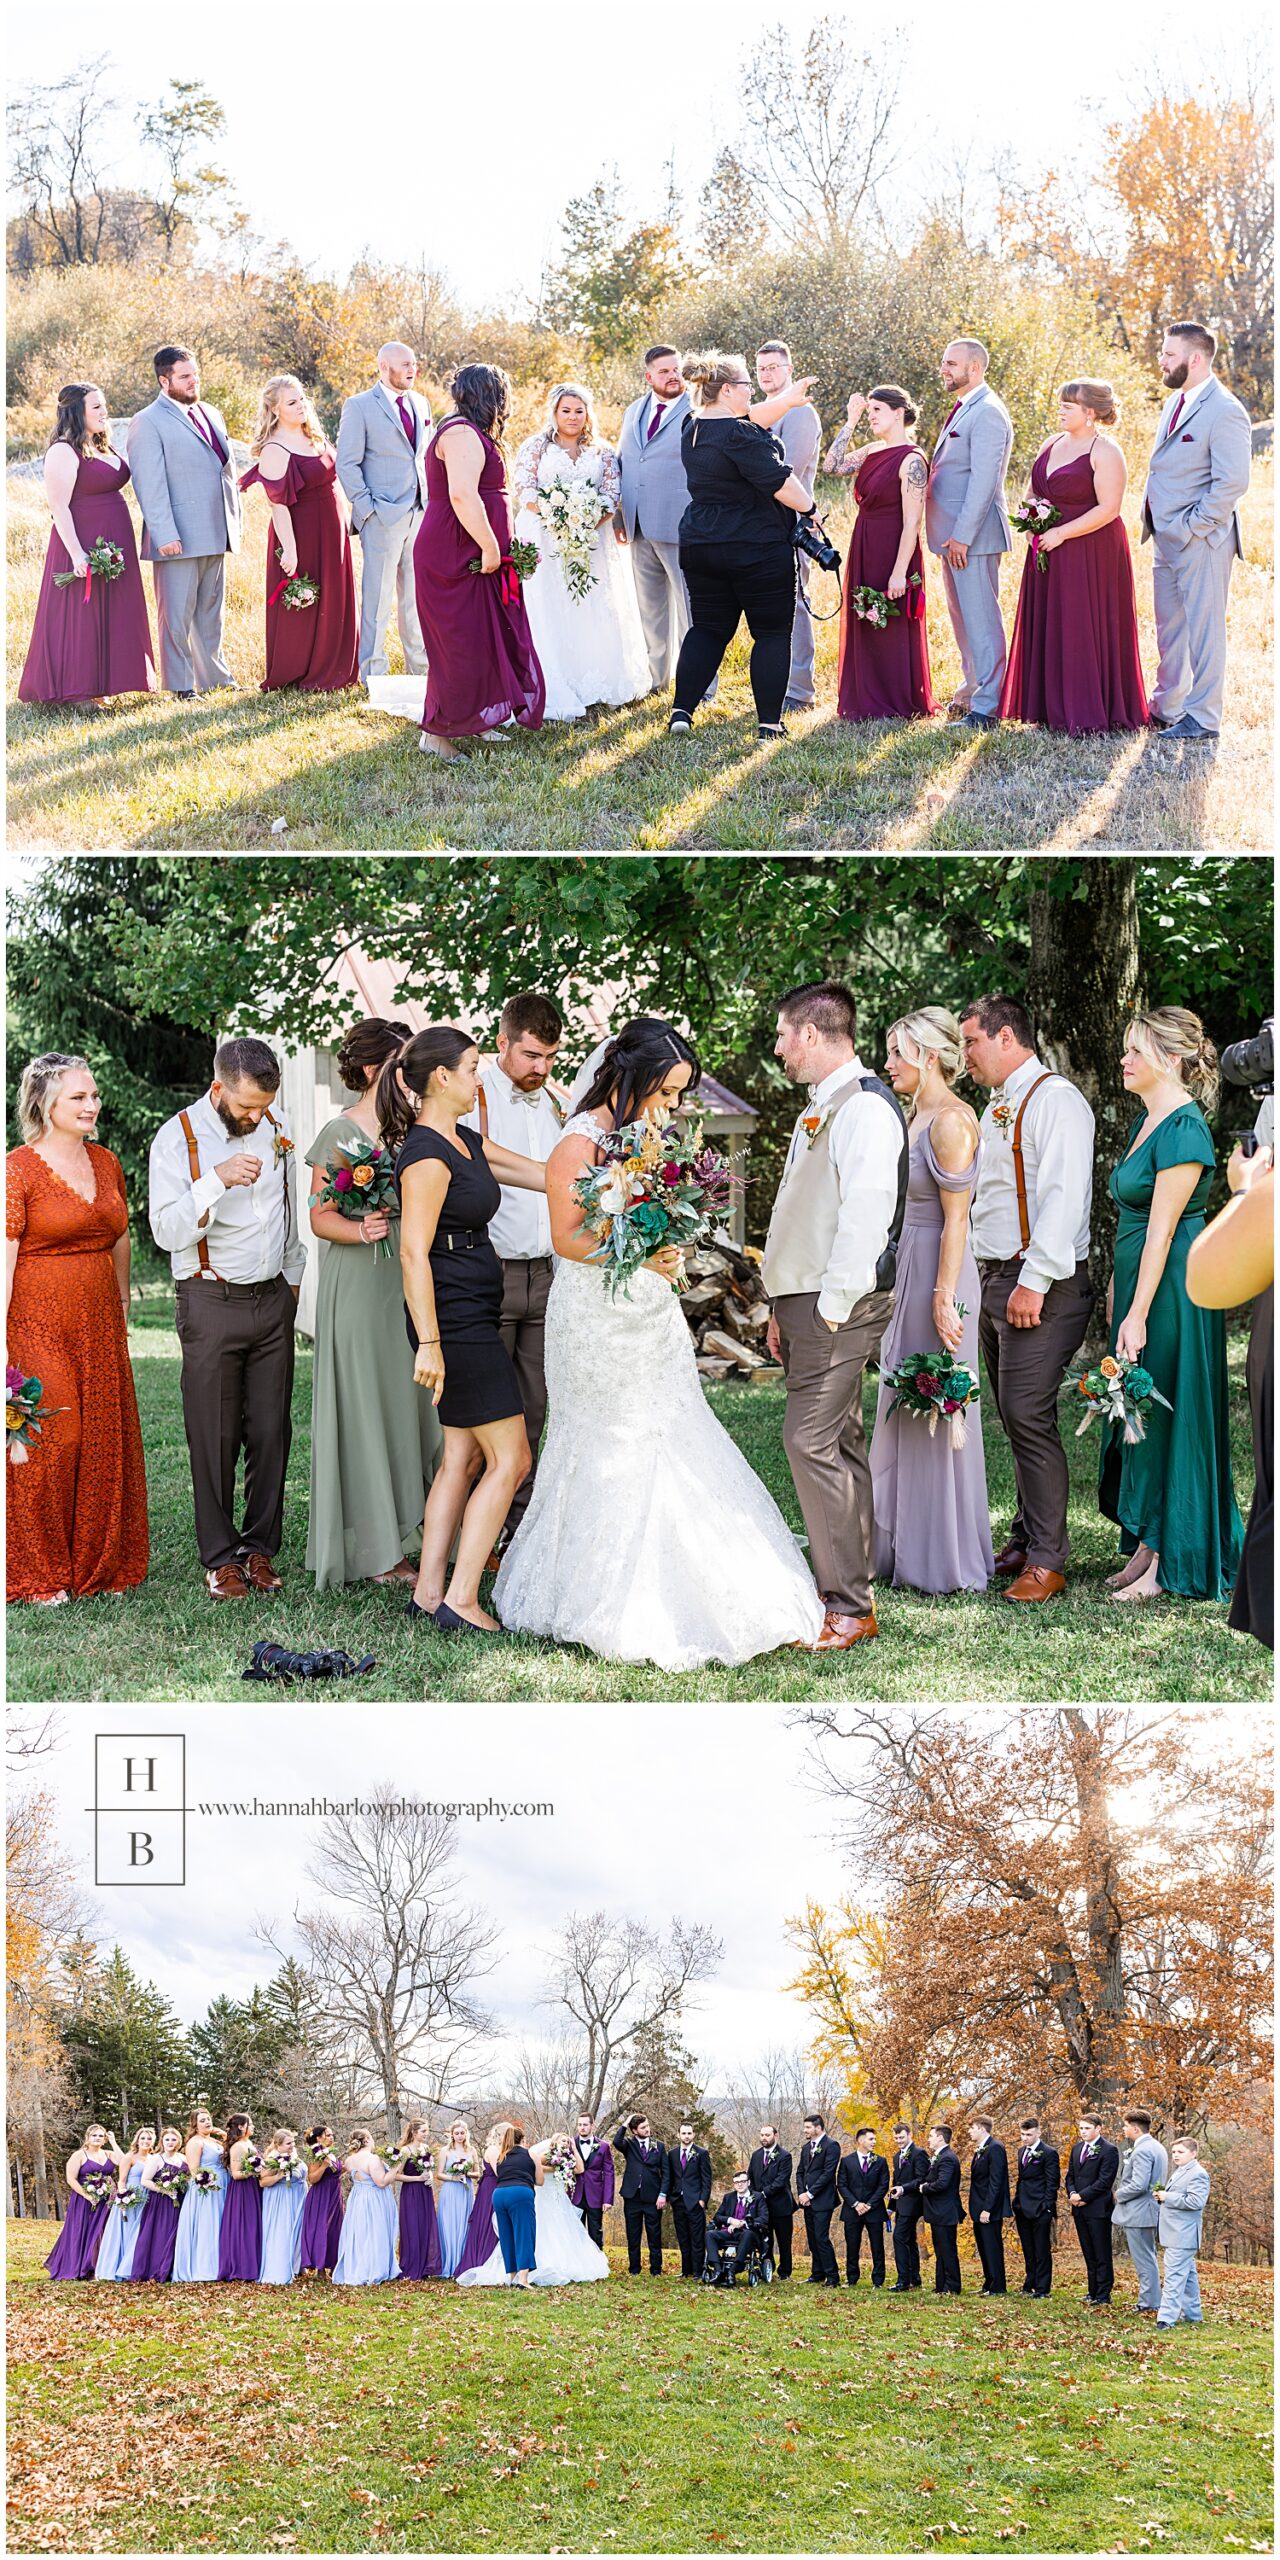 Wedding photographer posts bridal party and family shots